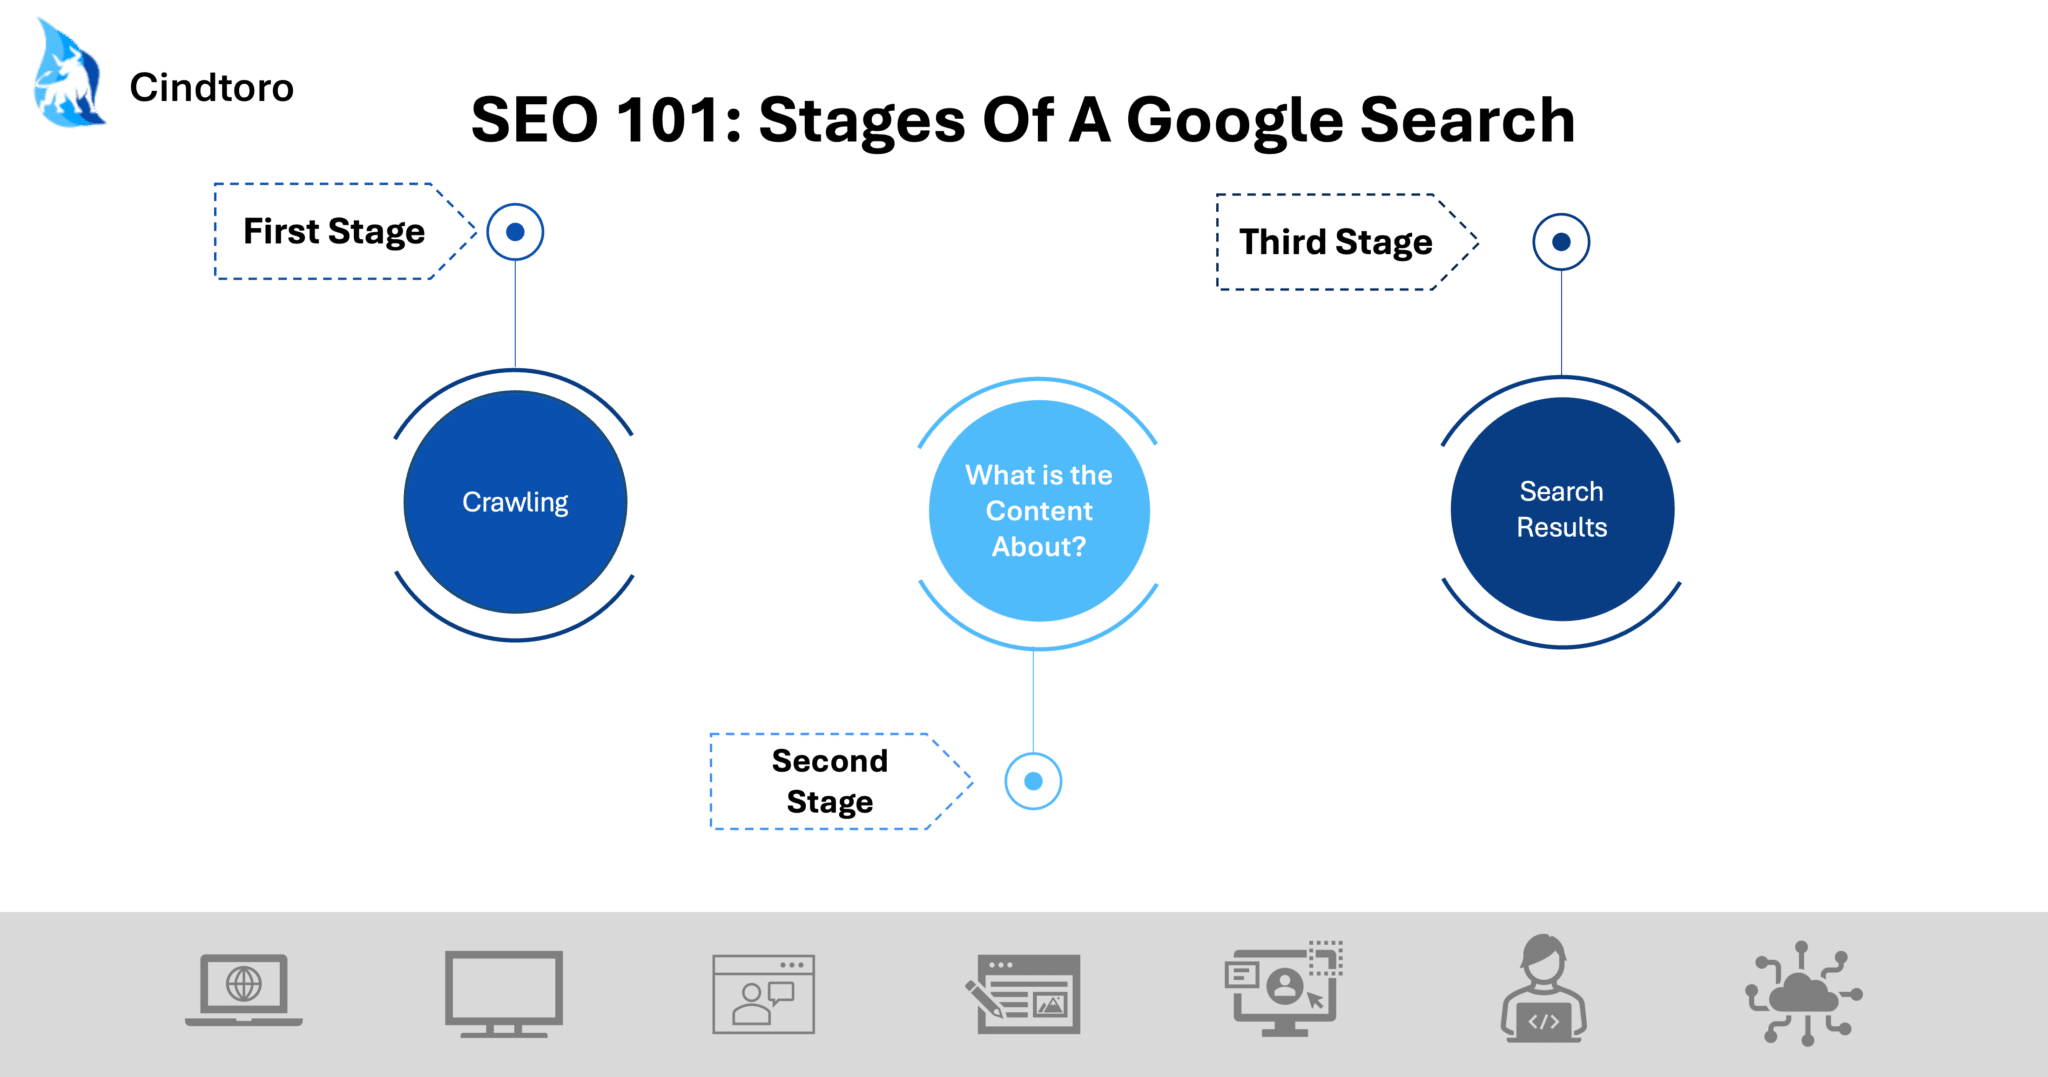 SEO 101 What are the Stages Of A Google Search from start to finish